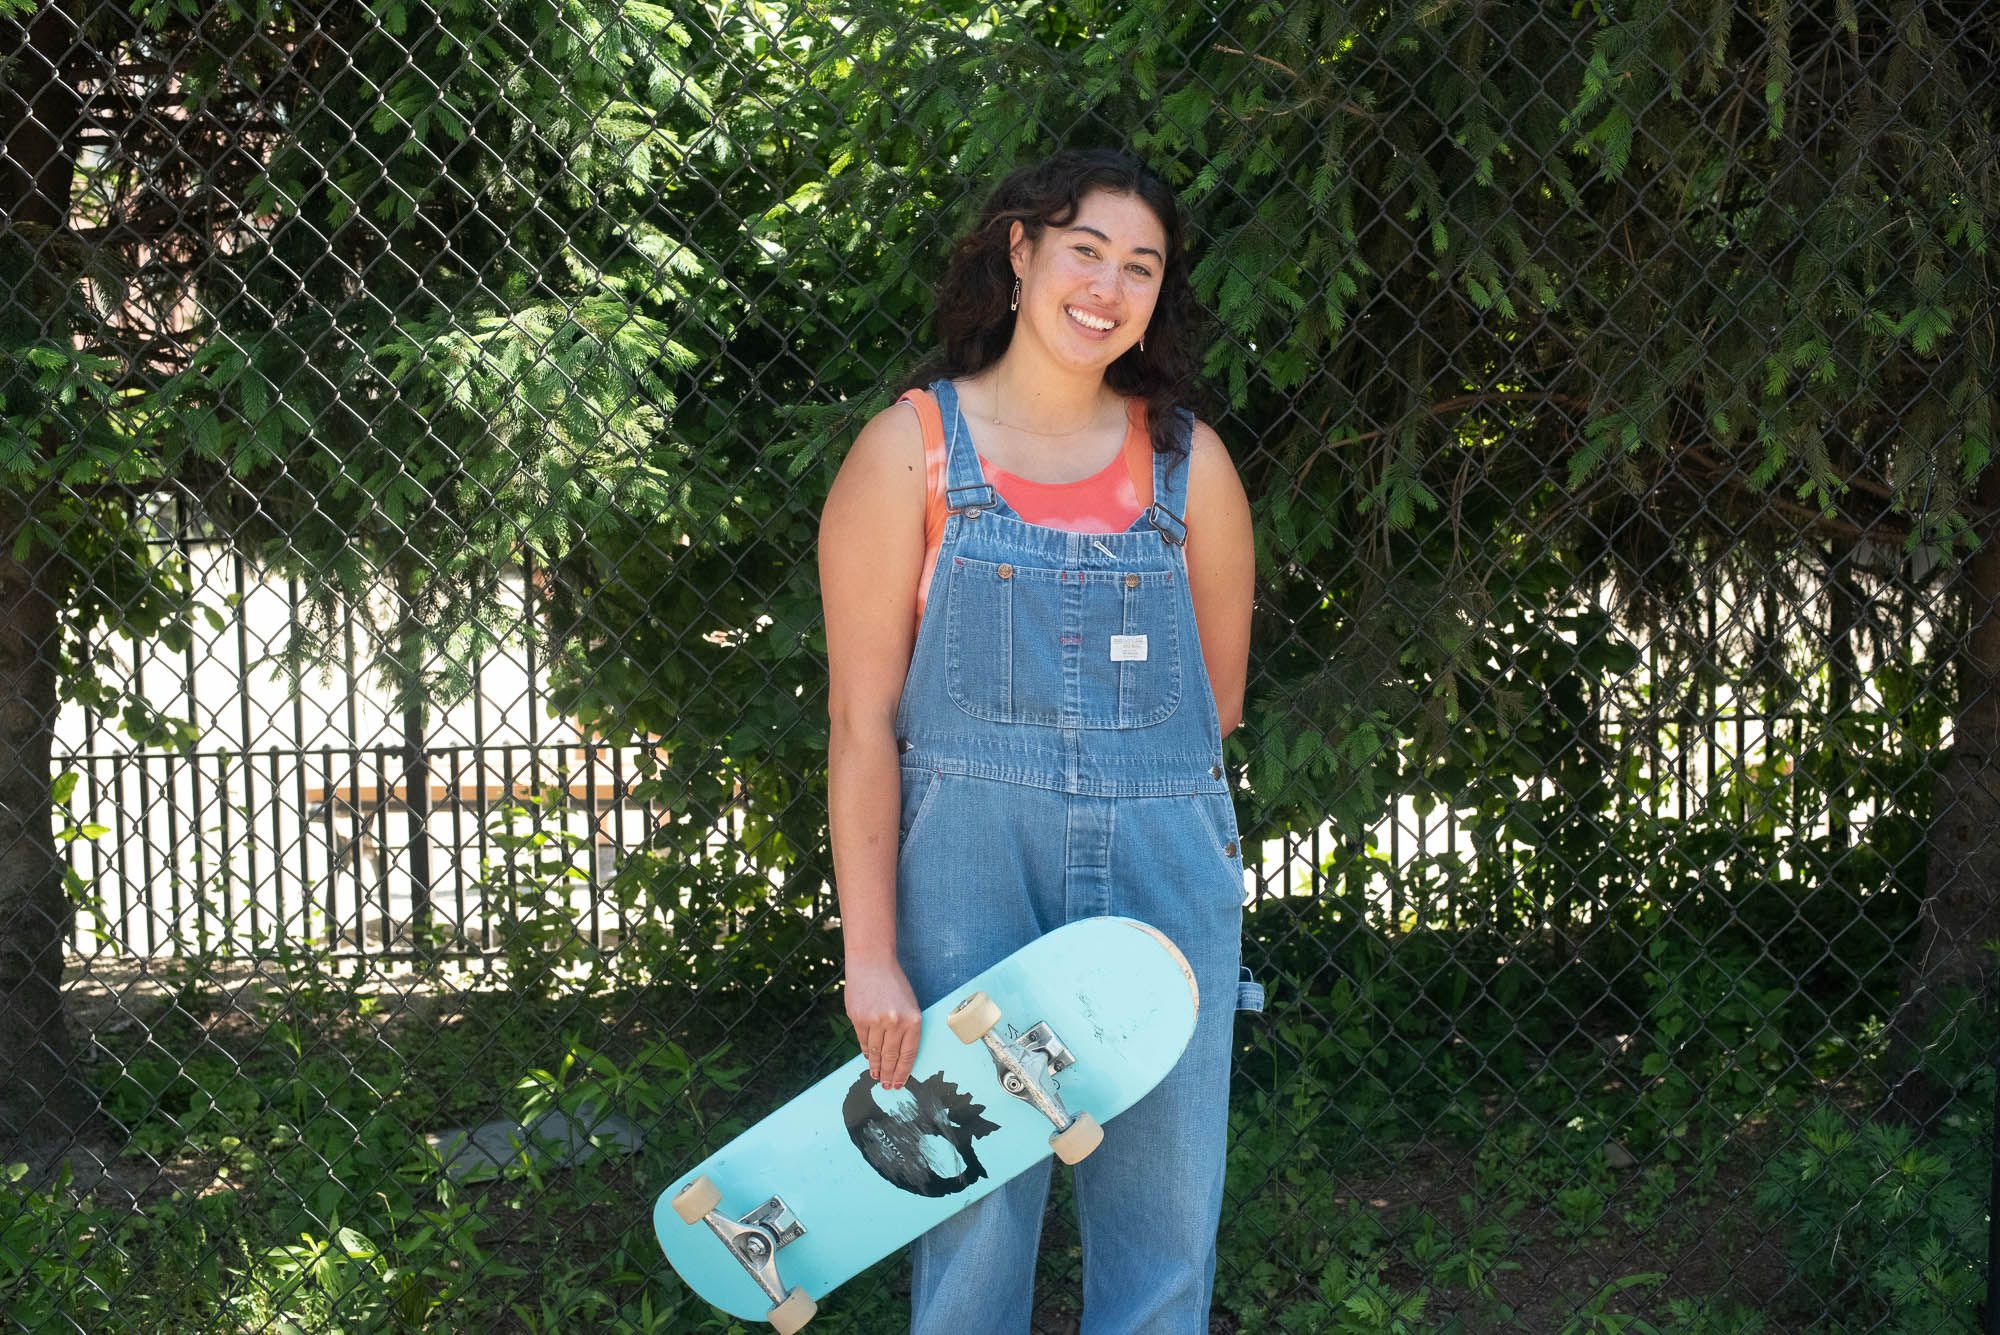 Mullin smiles at the camera wearing blue jean overalls and an orange top underneath while holding her light blue skateboard with a black skull on it.